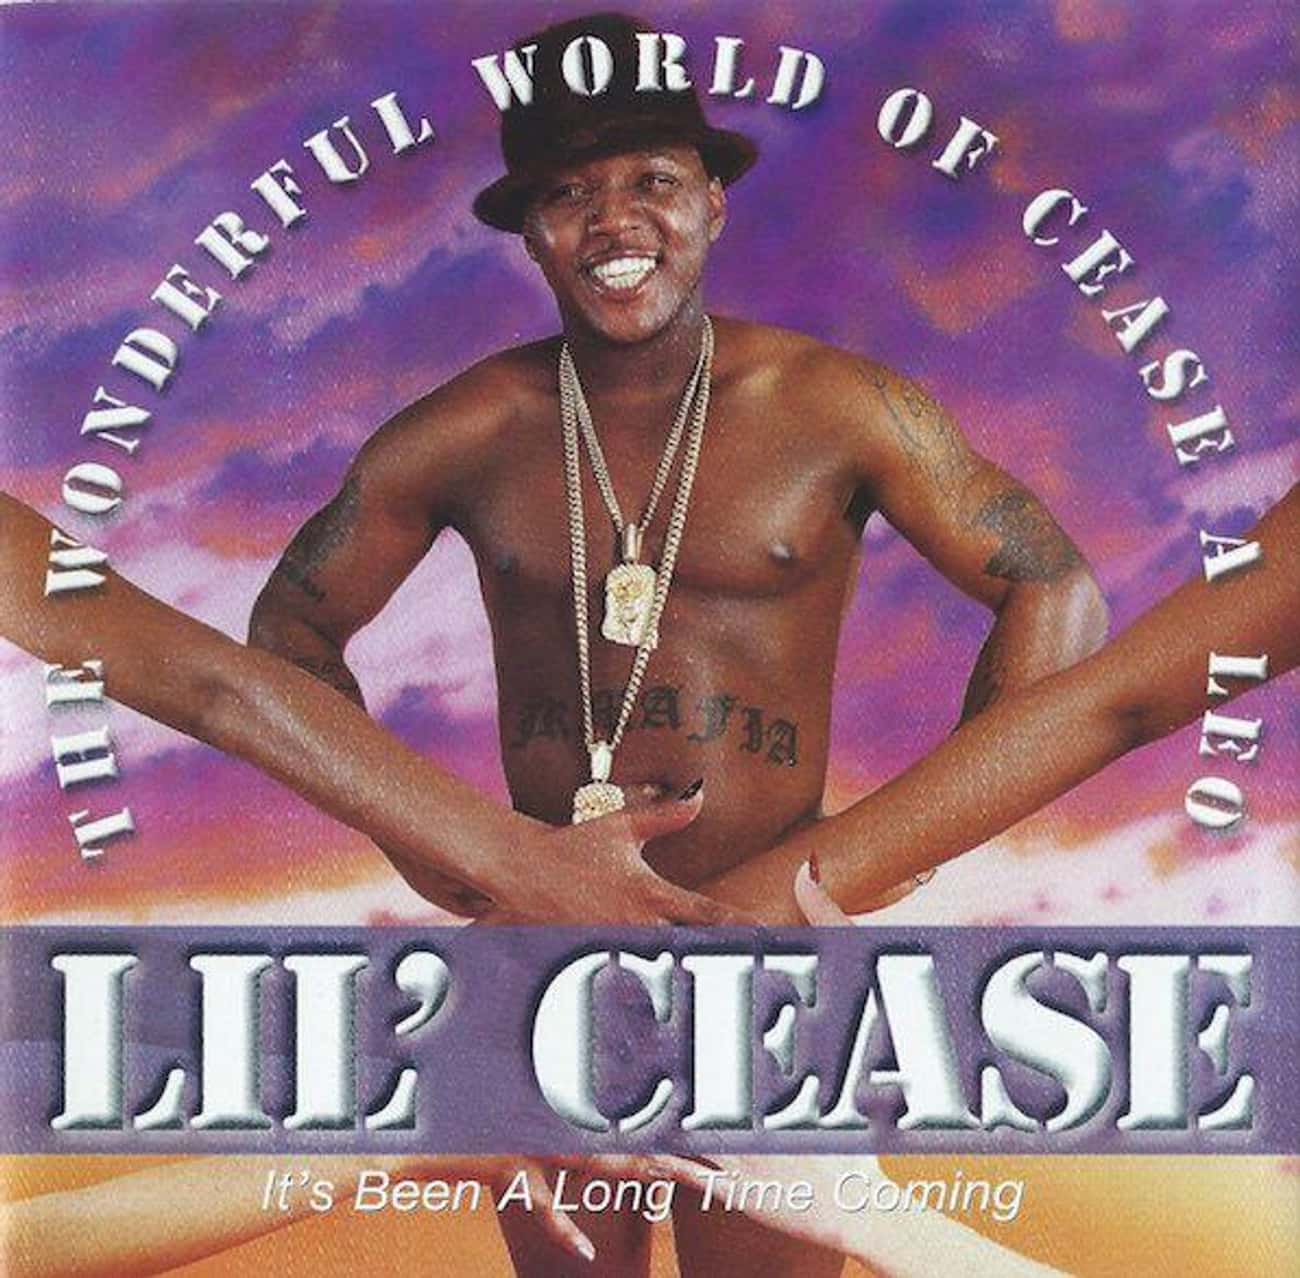 Lil Cease “The Wonderful World of Cease a Leo”